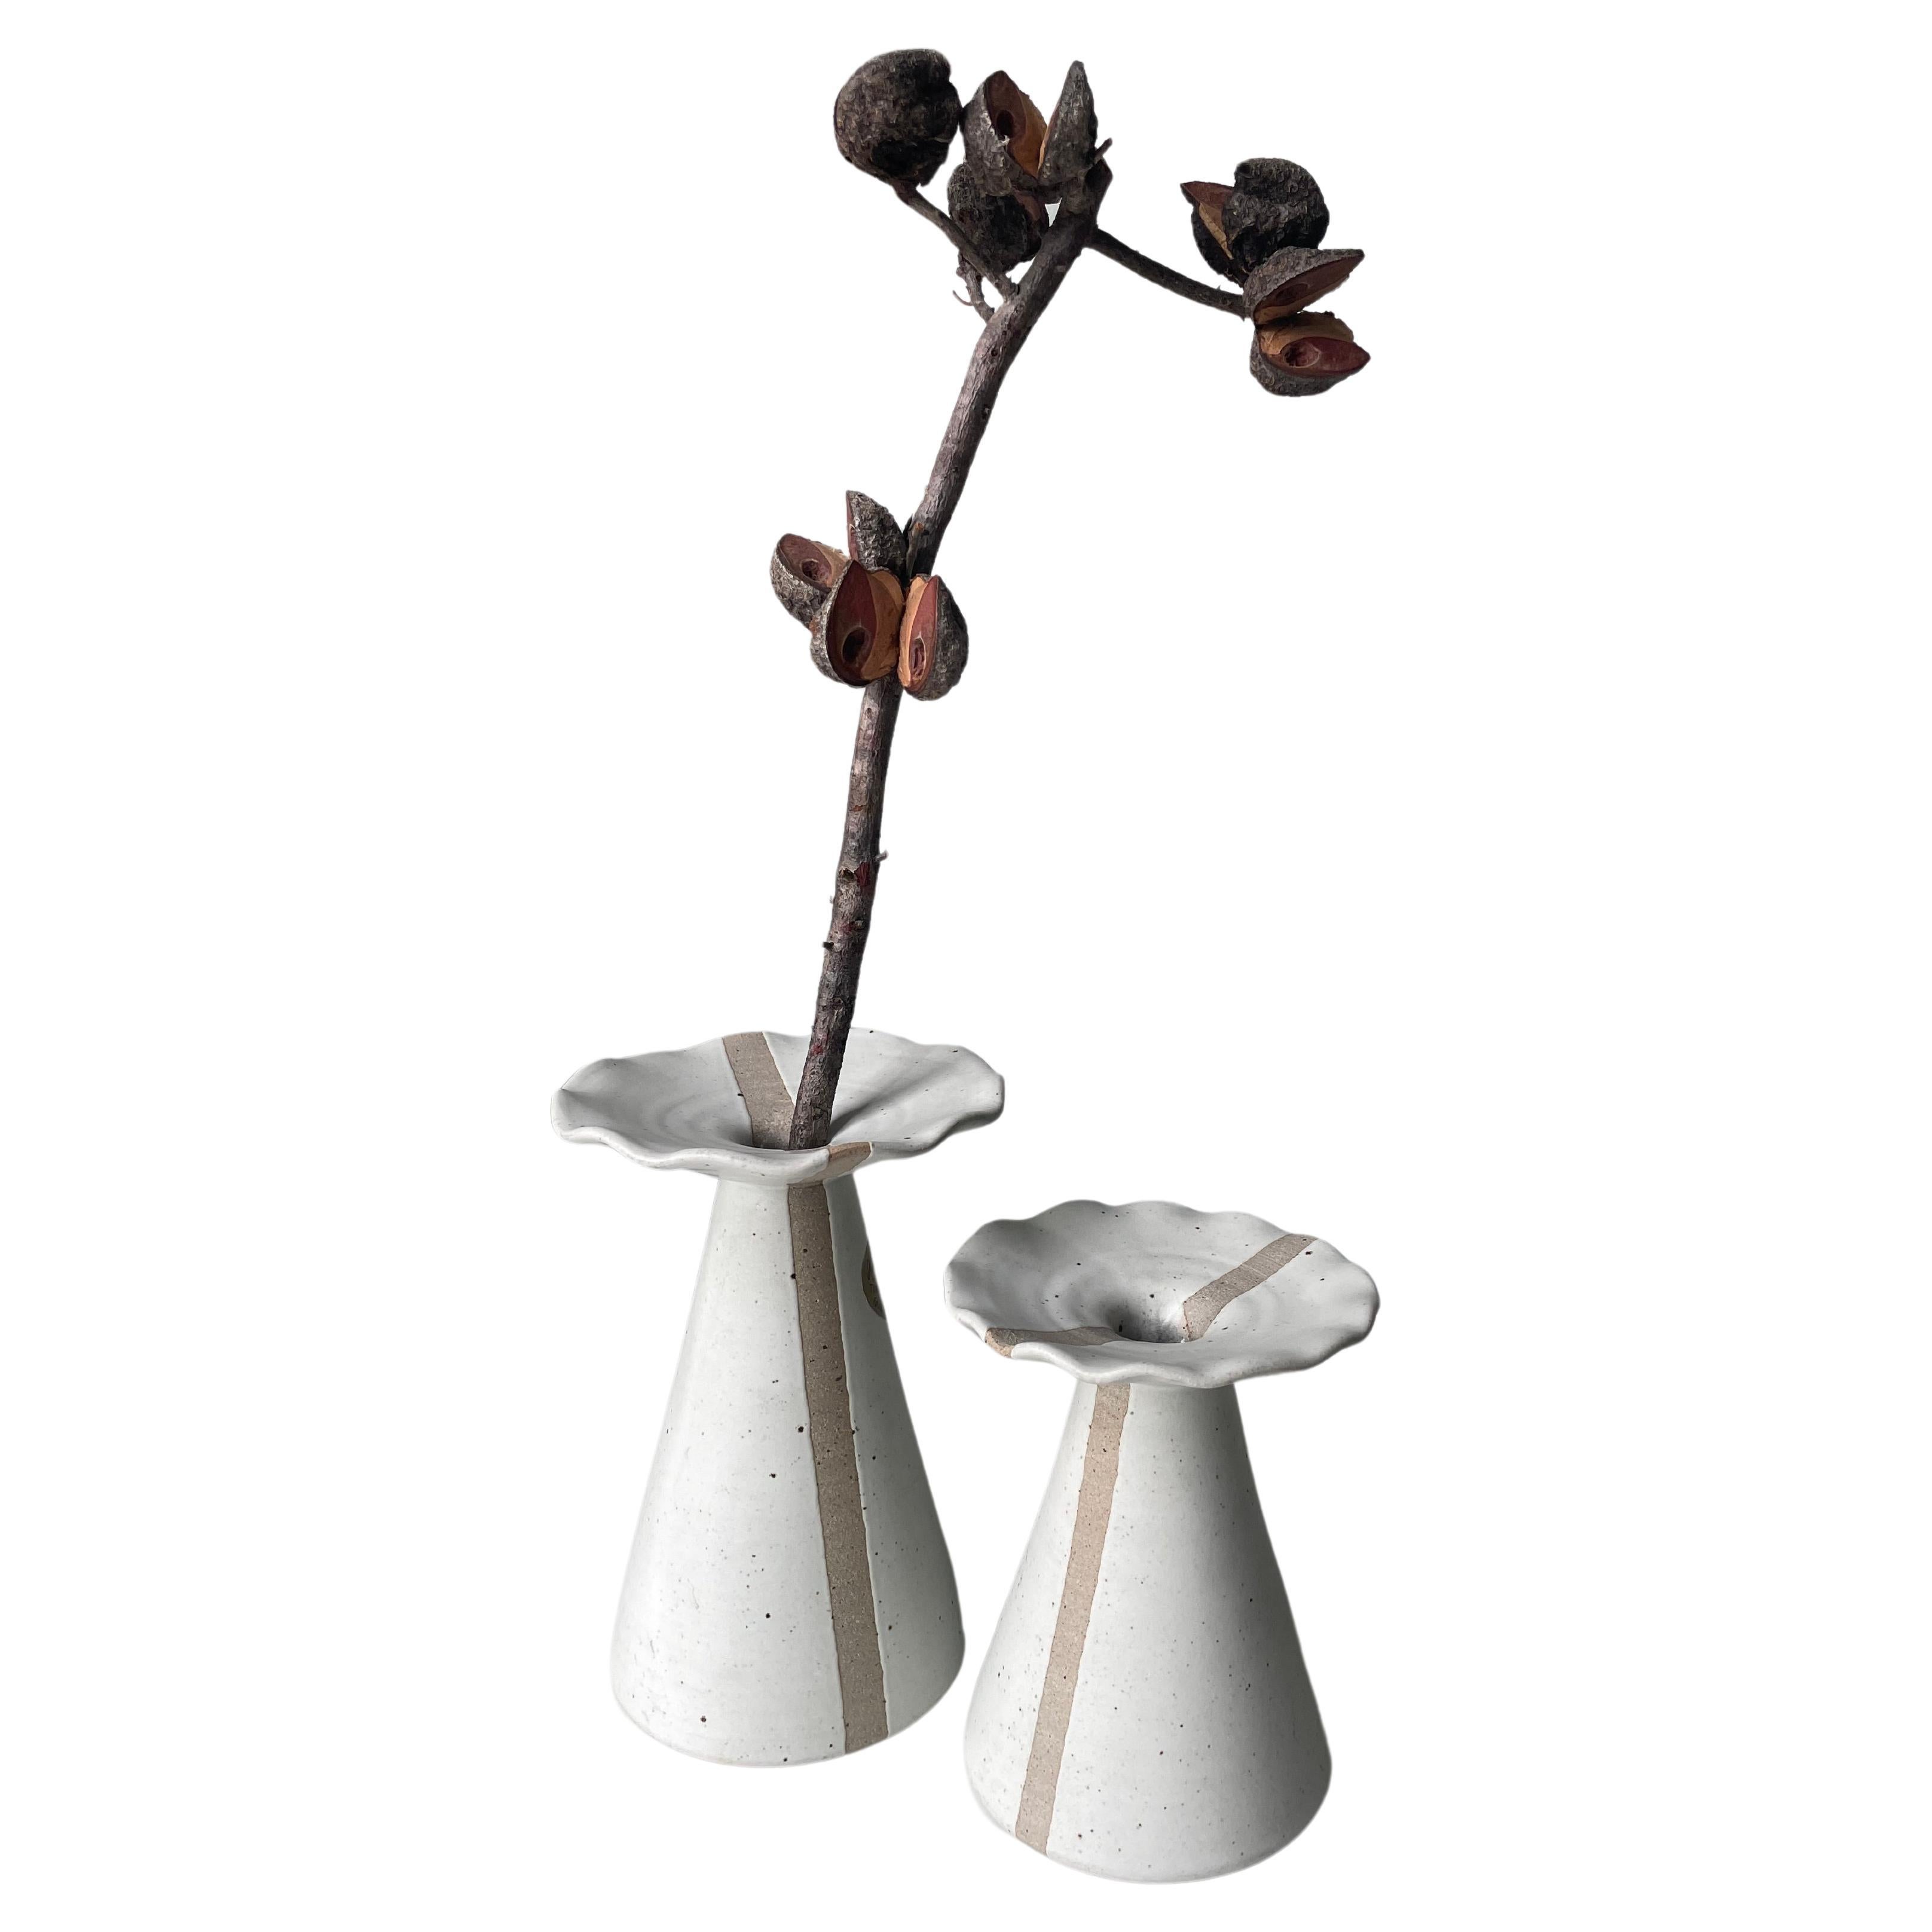 Modern Earth-Toned Vases, Candle Holders with Graphic Line, Denmark, 1980s For Sale